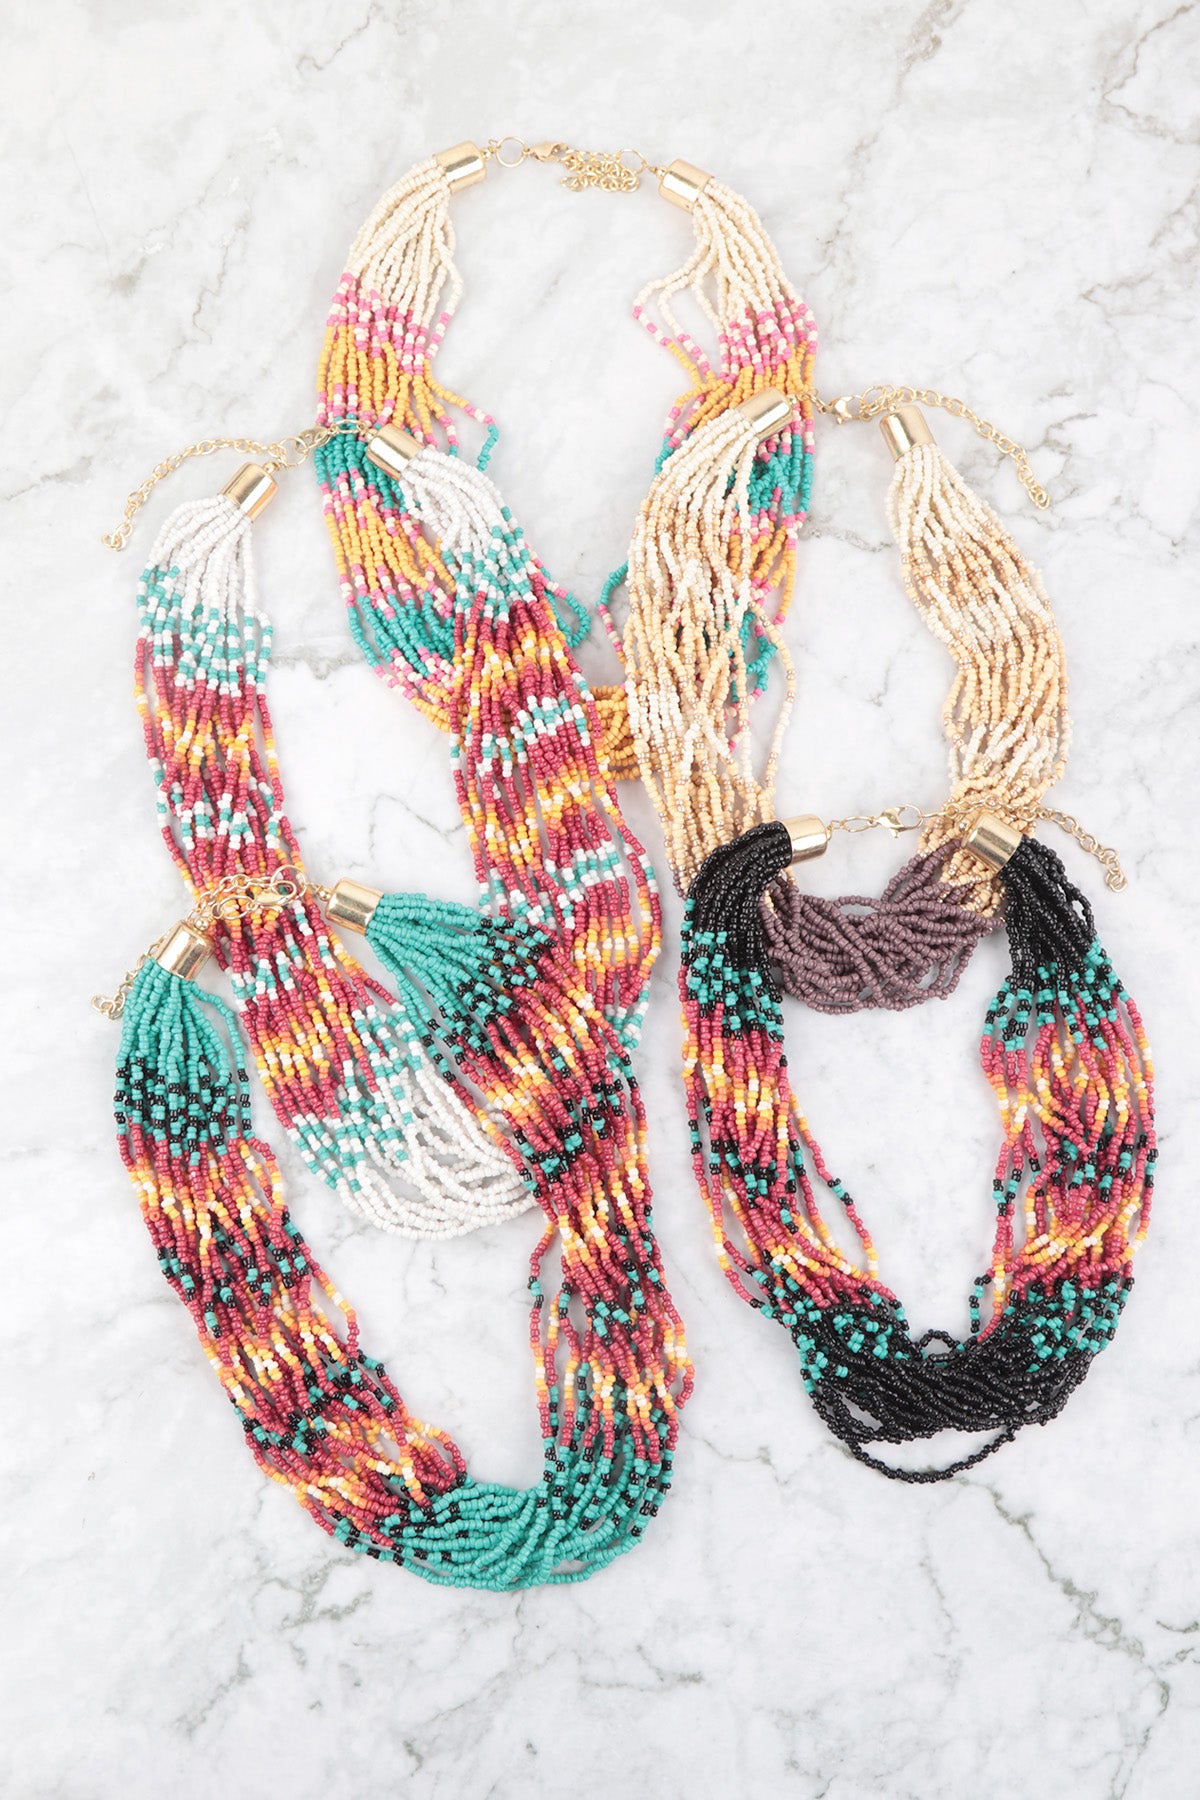 SEED BEAD MULTI LAYERED STATEMENT NECKLACE AND EARRING SET